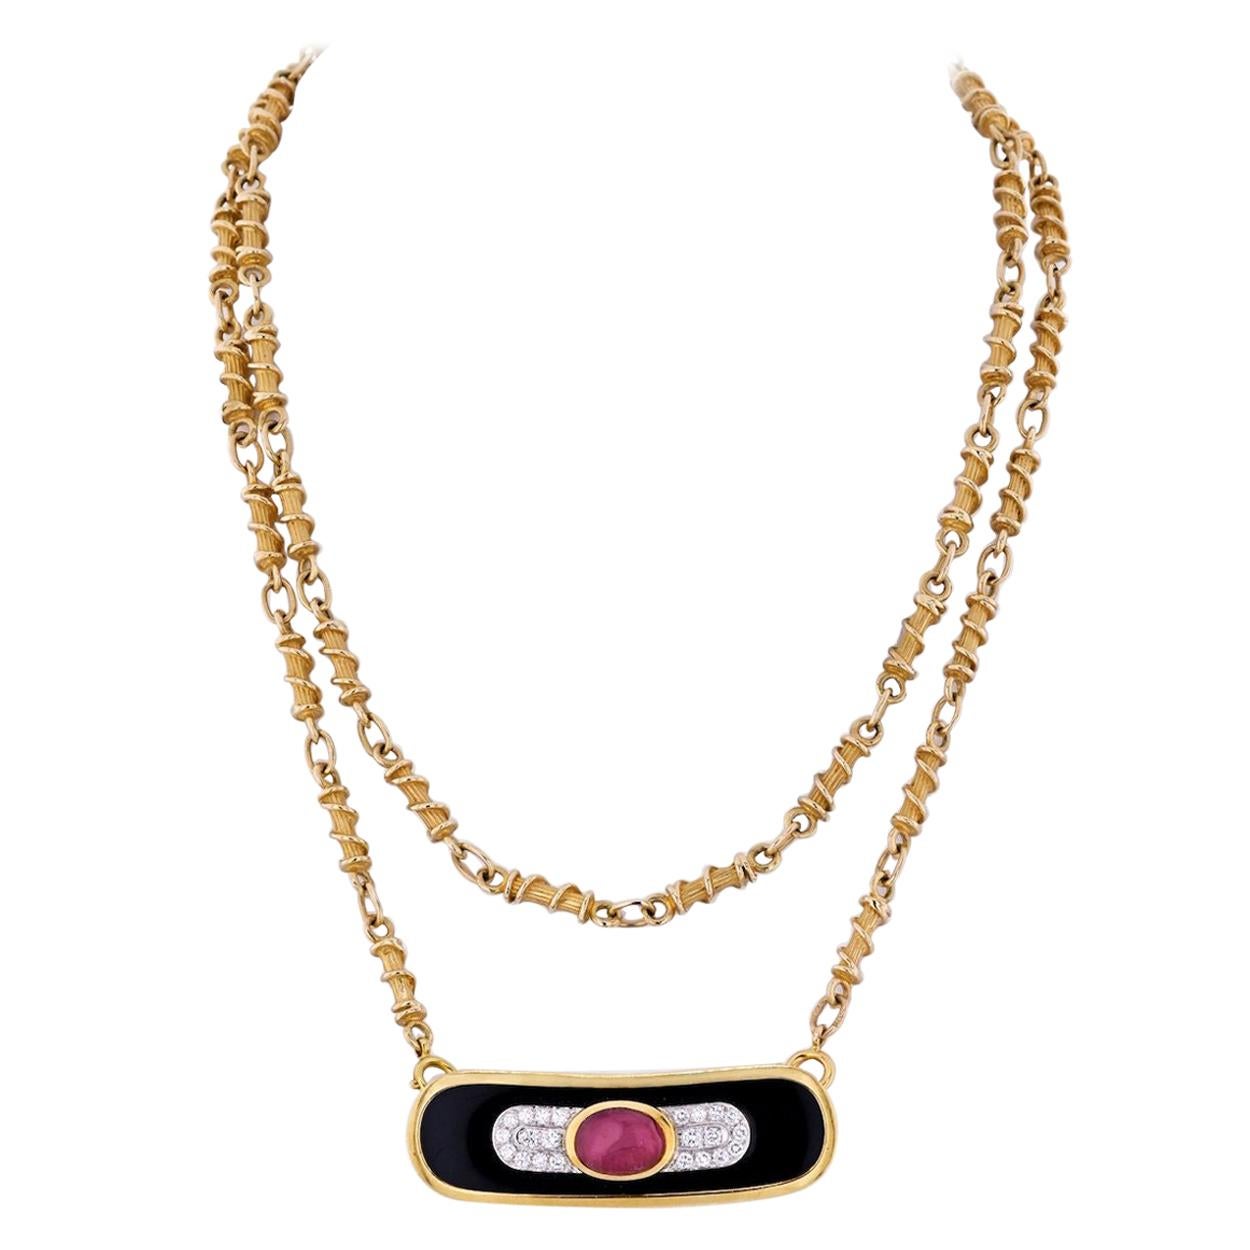 David Webb Yellow Gold Ruby, Diamond and Lacquer Pendant Necklace on Long Chain